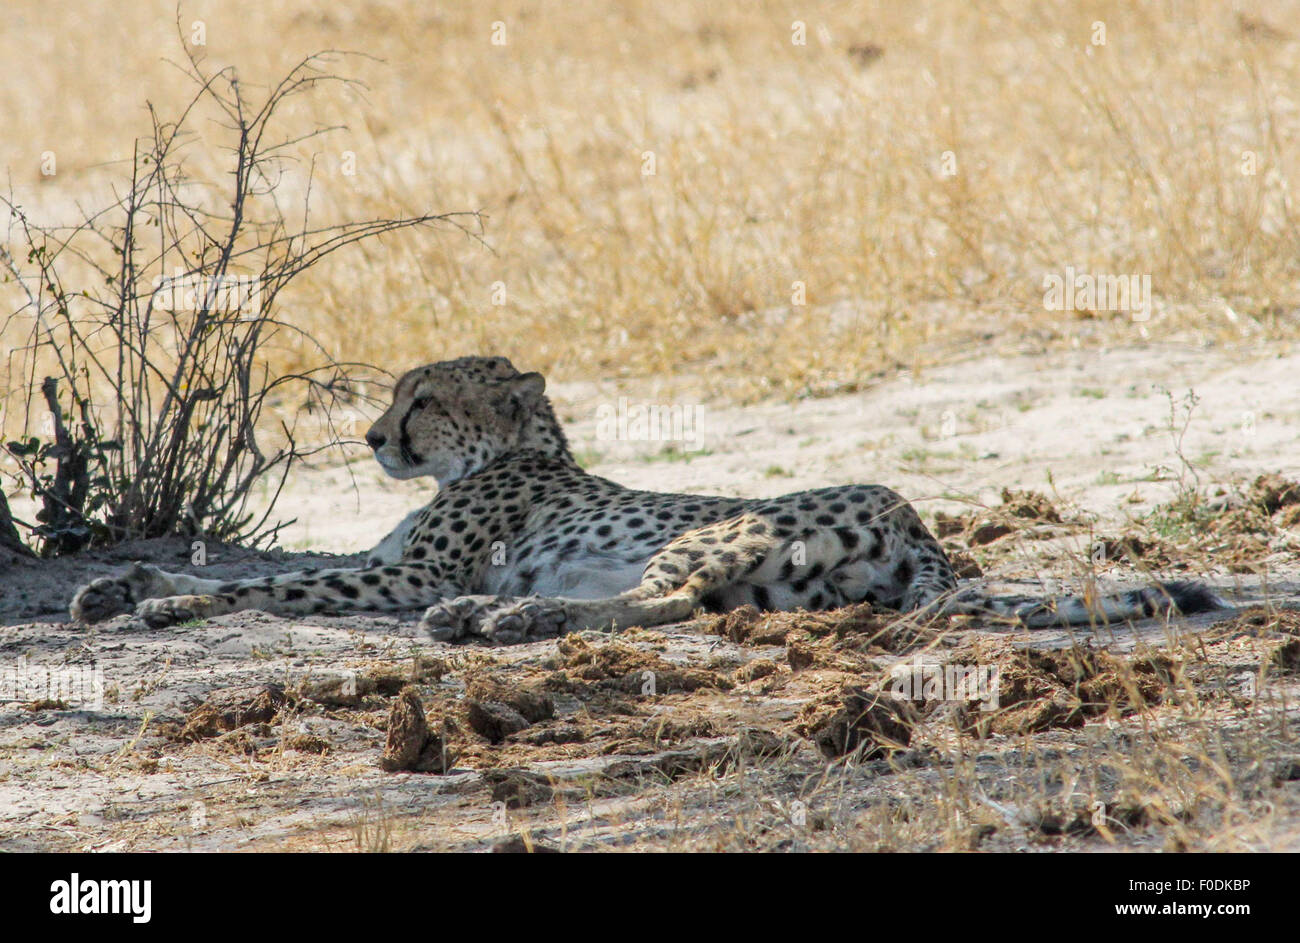 (150813) -- HARARE, Aug. 13 (Xinhua) -- A cheetah rests in Hwange National Park, western Zimbabwe, Aug. 6, 2015. Zimbabwe has lifted a ban on big game hunting which lasted for barely ten days after the killing of Cecil the lion by an American dentist last month. The Zimbabwe National Parks and Wildlife Management Authority imposed the ban on Aug. 1 in areas surrounding Hwange National Park in the wake of international outcry over the illegal killing of the iconic Cecil who was a major tourist attraction. (Xinhua/Stringer) Stock Photo